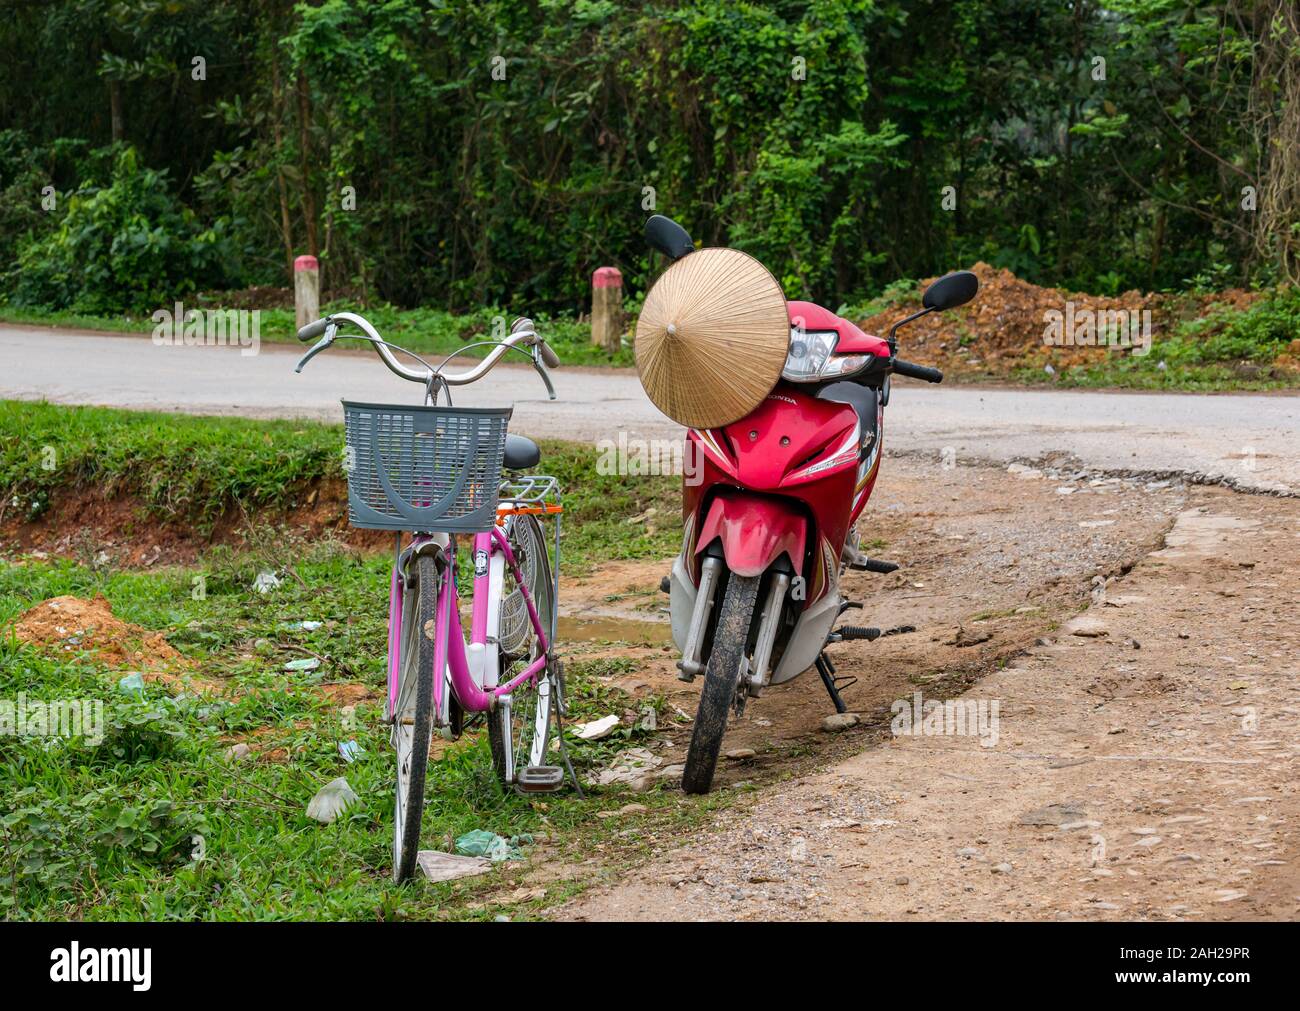 Bicycle and scooter parked by roadside with conical hat, Thai Nguyen Province, Northern Vietnam, Asia Stock Photo